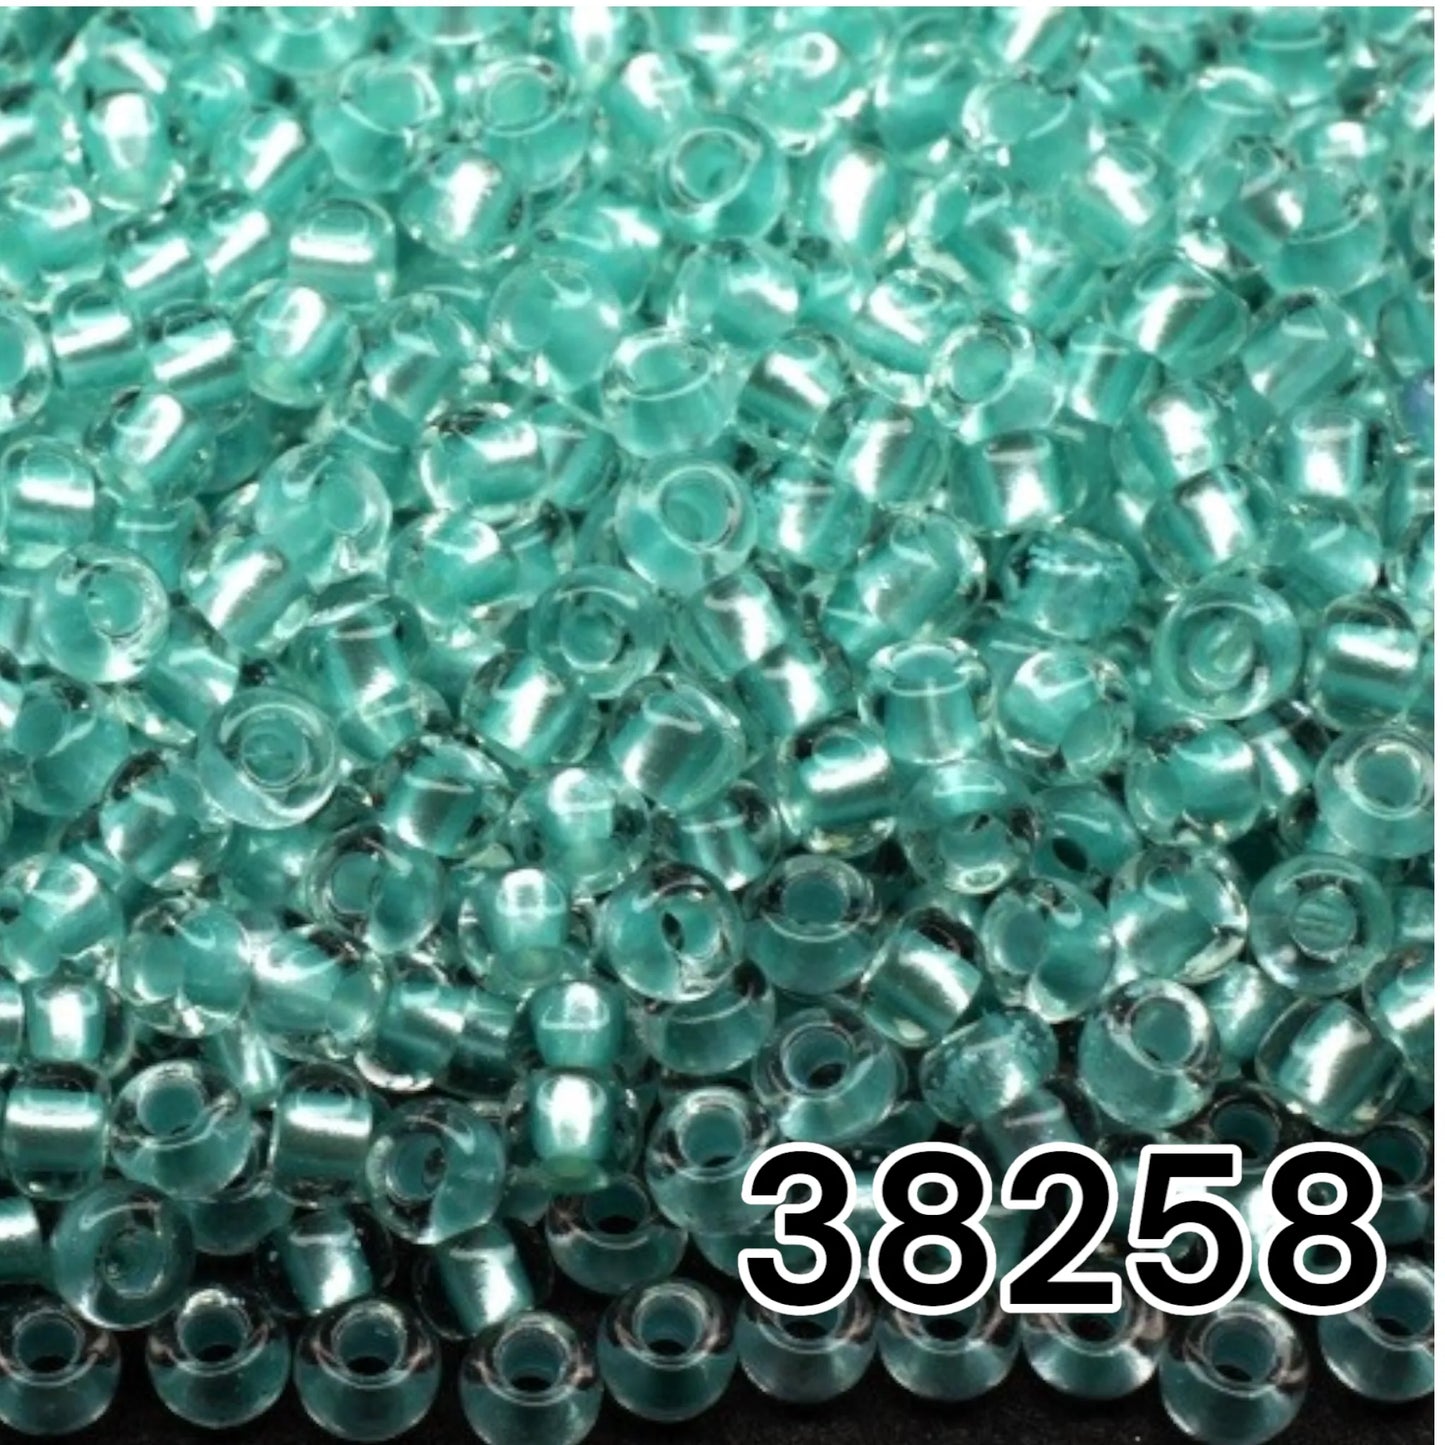 38258 Czech seed beads PRECIOSA Rocailles 10/0 turquoise. Crystal - Terra Pearl Lined.